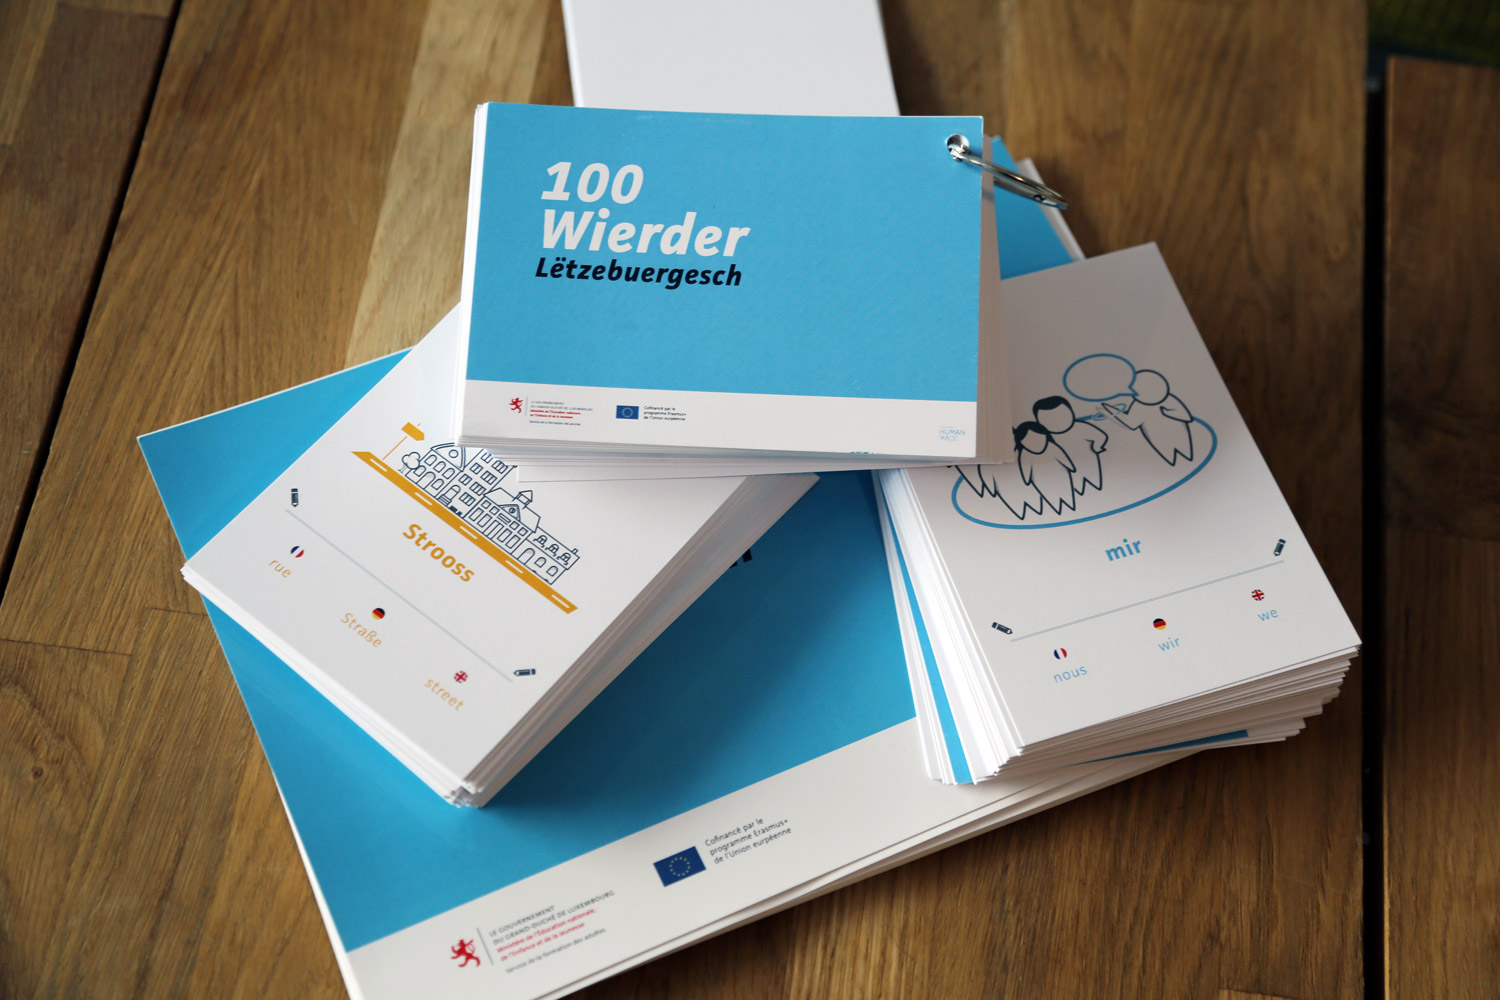 100 Wierder Lëtzebuergesch The 100 Wierder Lëtzebuergesch tool was created for Min. of Integration to enable the refugees to have contact with the Luxembourgish local population and make it more easy to integrate the educational system in Luxembourg. The approach is: Multilingual, highlighting the Luxembourgish language while valuing the other languages of the country as well as the mother tongue of the newcomers, Interactive and playful, allowing to practice the Luxembourgish language. The Adult Education Service uses the 100 Wierder Lëtzebuergesch course material in its classes and makes it available to training organizations, associations and volunteers who mentor and welcome people who want to integrate into Luxembourg